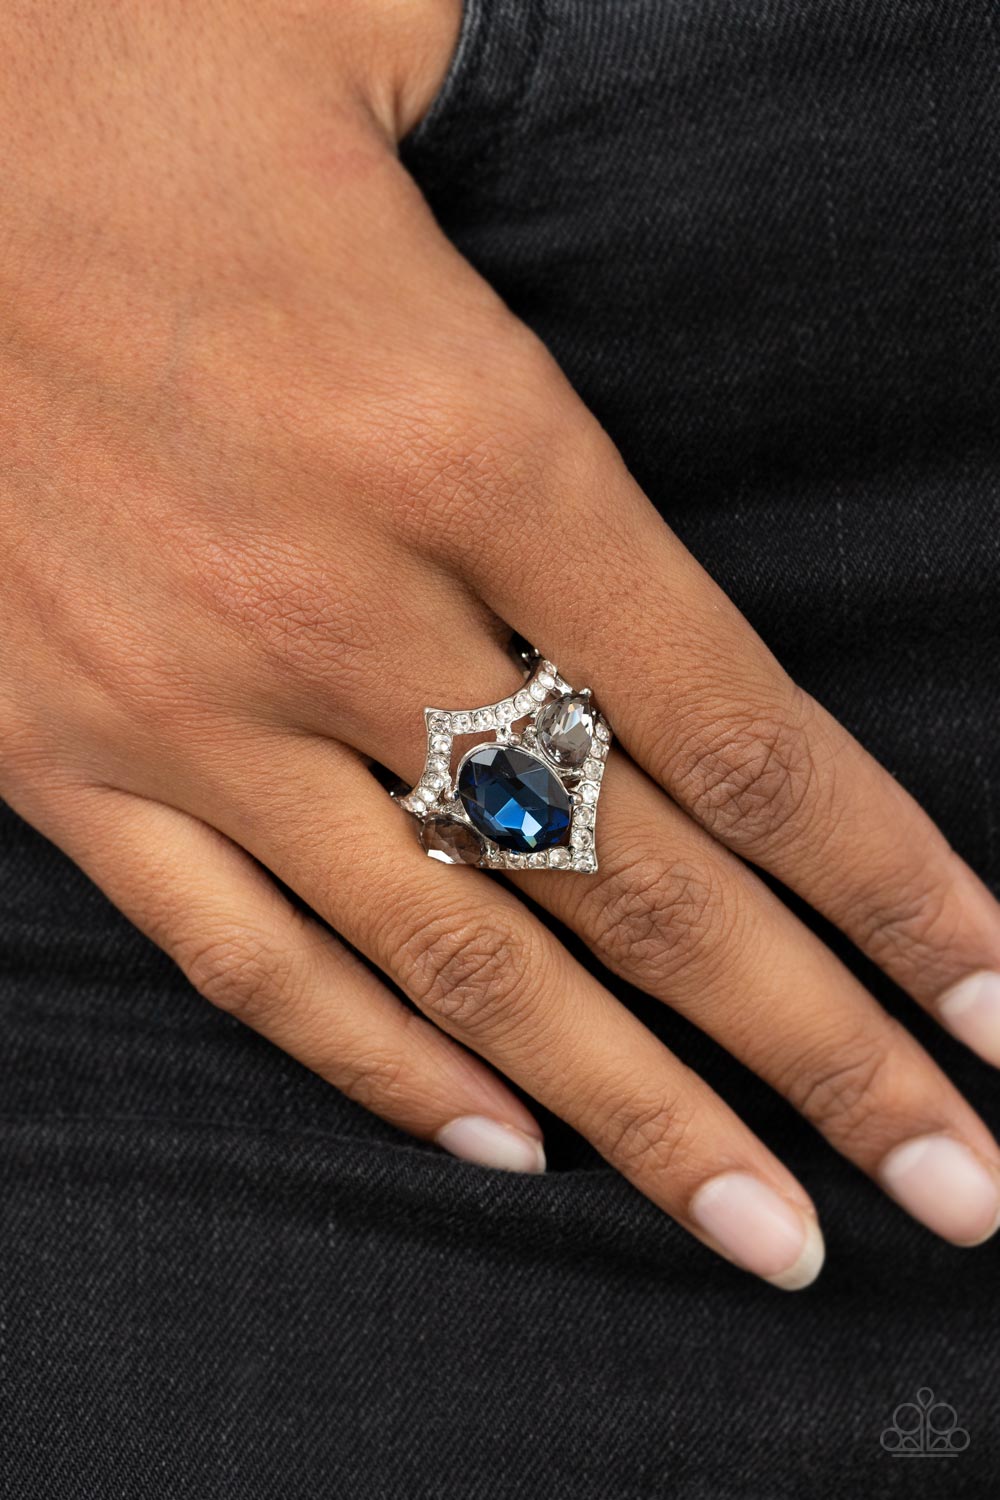 Bow Down to Dazzle Blue Rhinestone Ring - Paparazzi Accessories-on model - CarasShop.com - $5 Jewelry by Cara Jewels